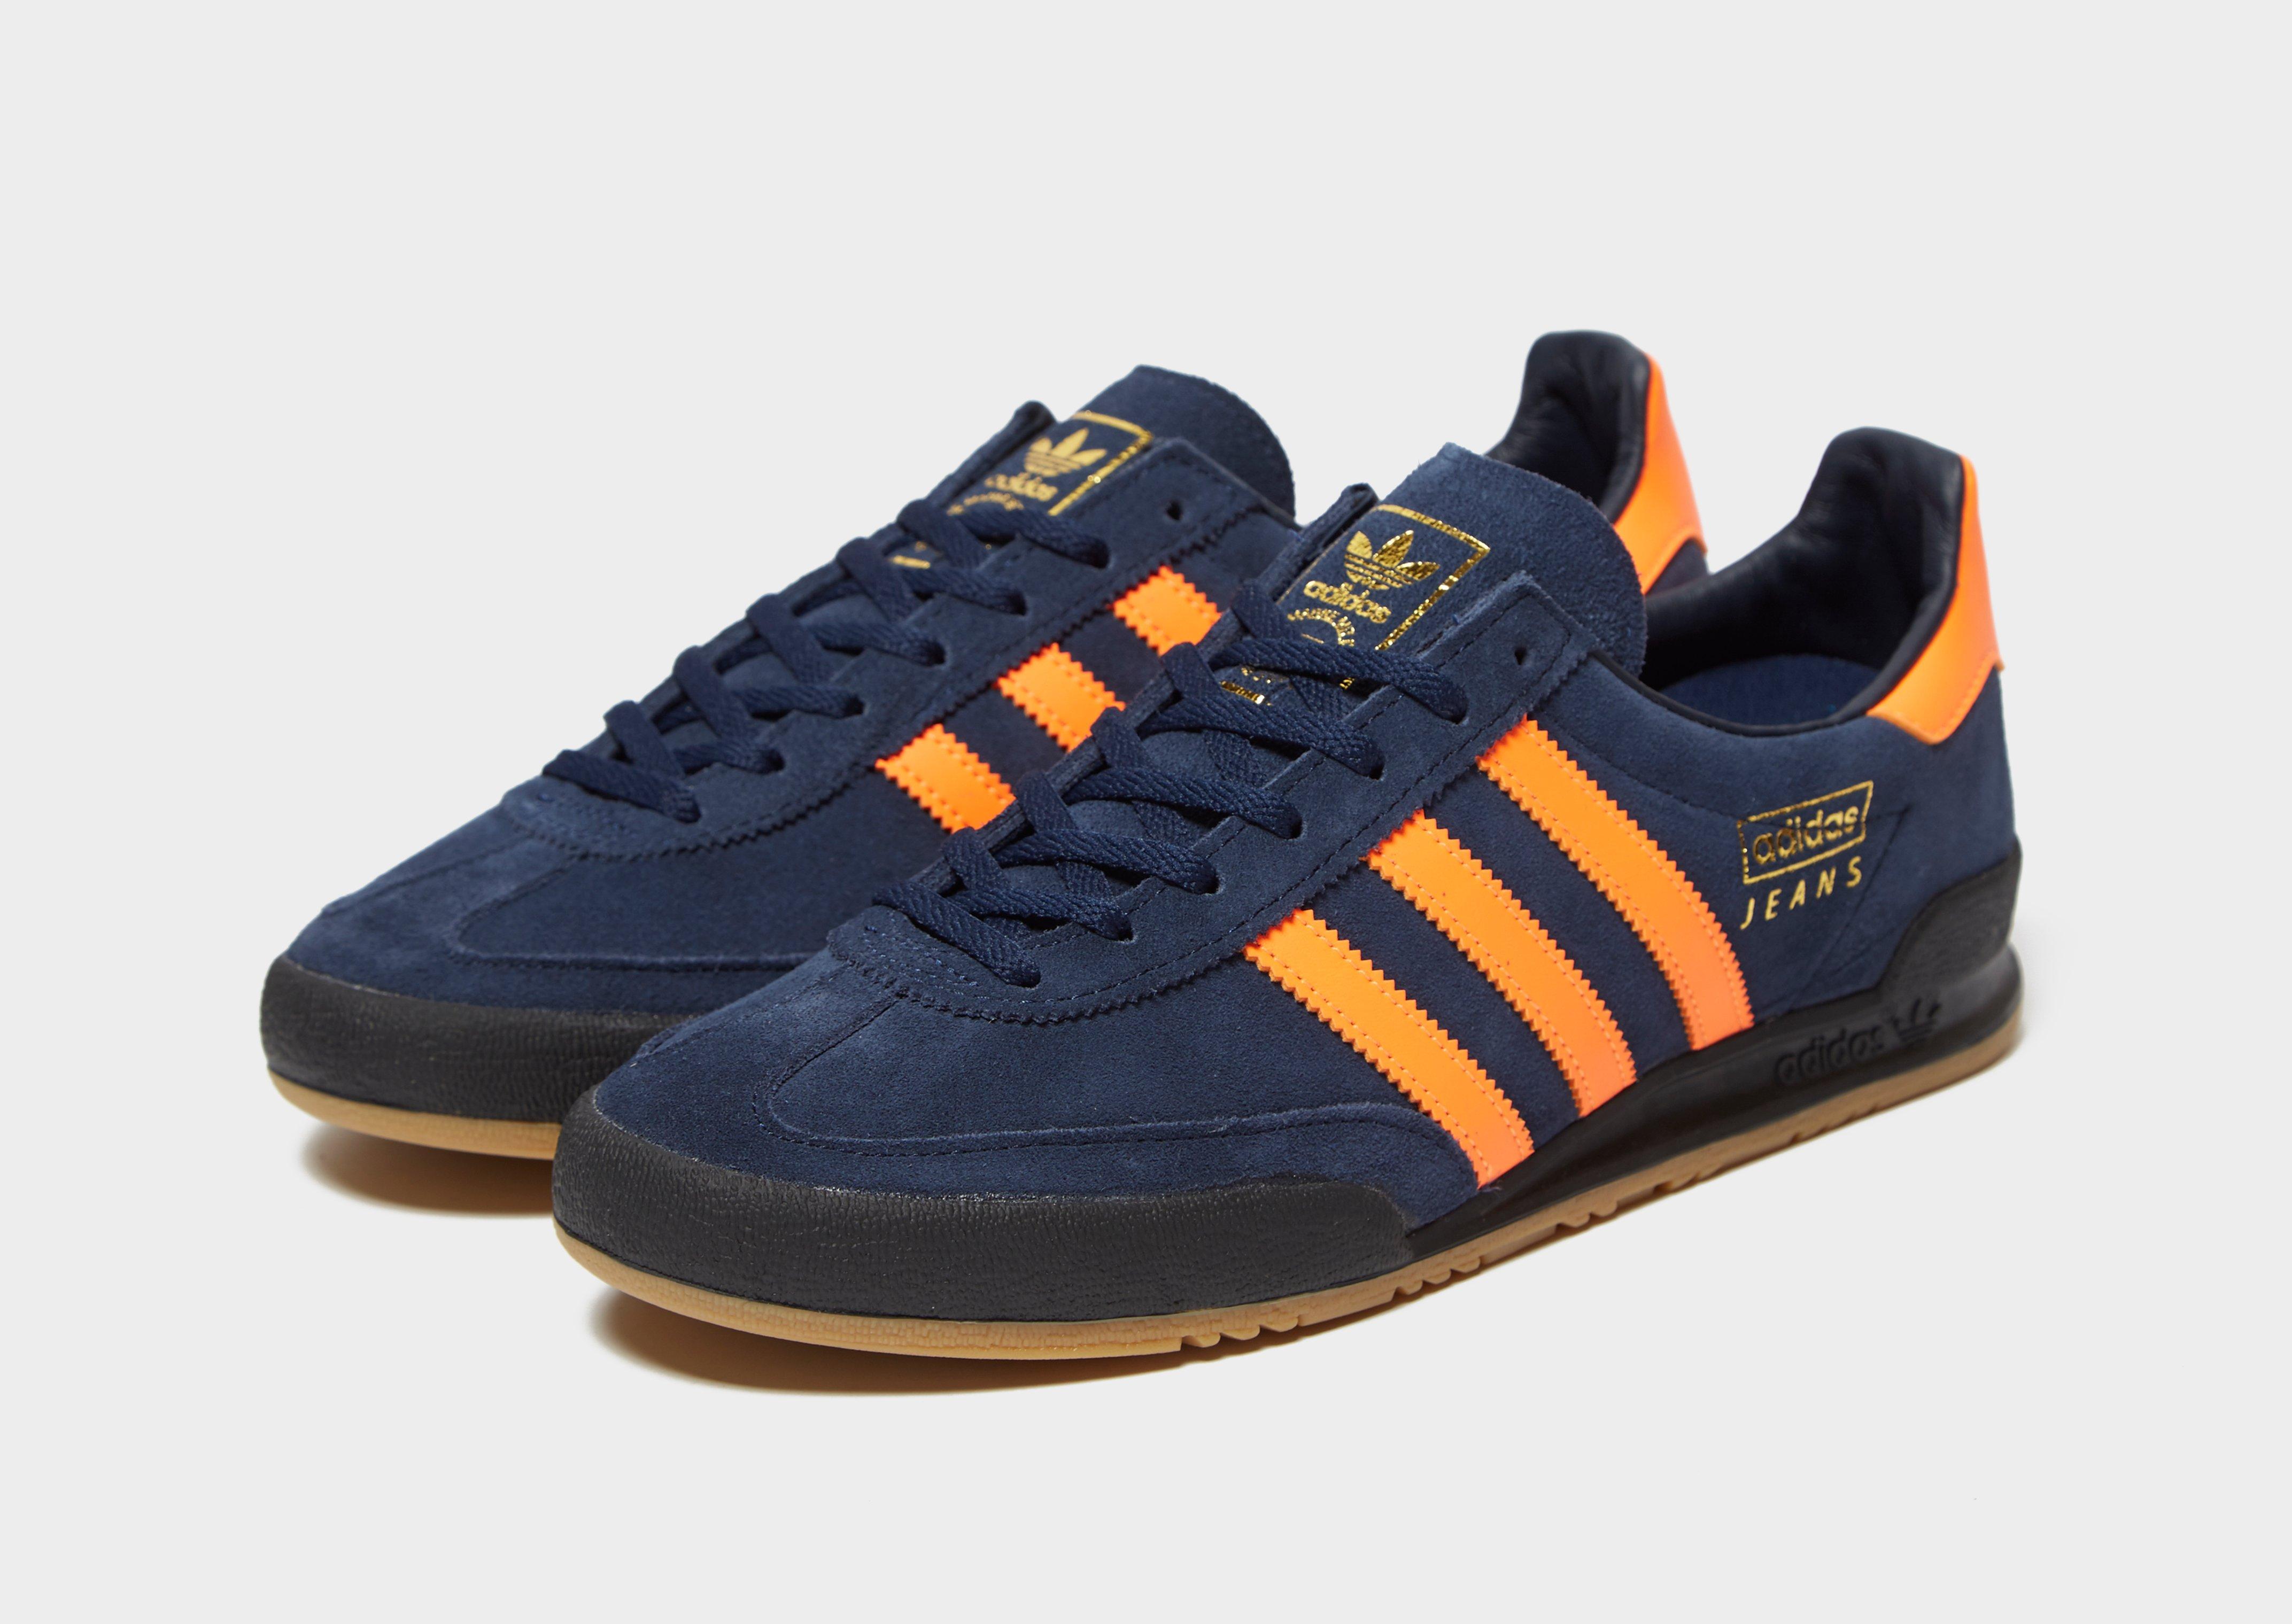 adidas jeans trainers size 8